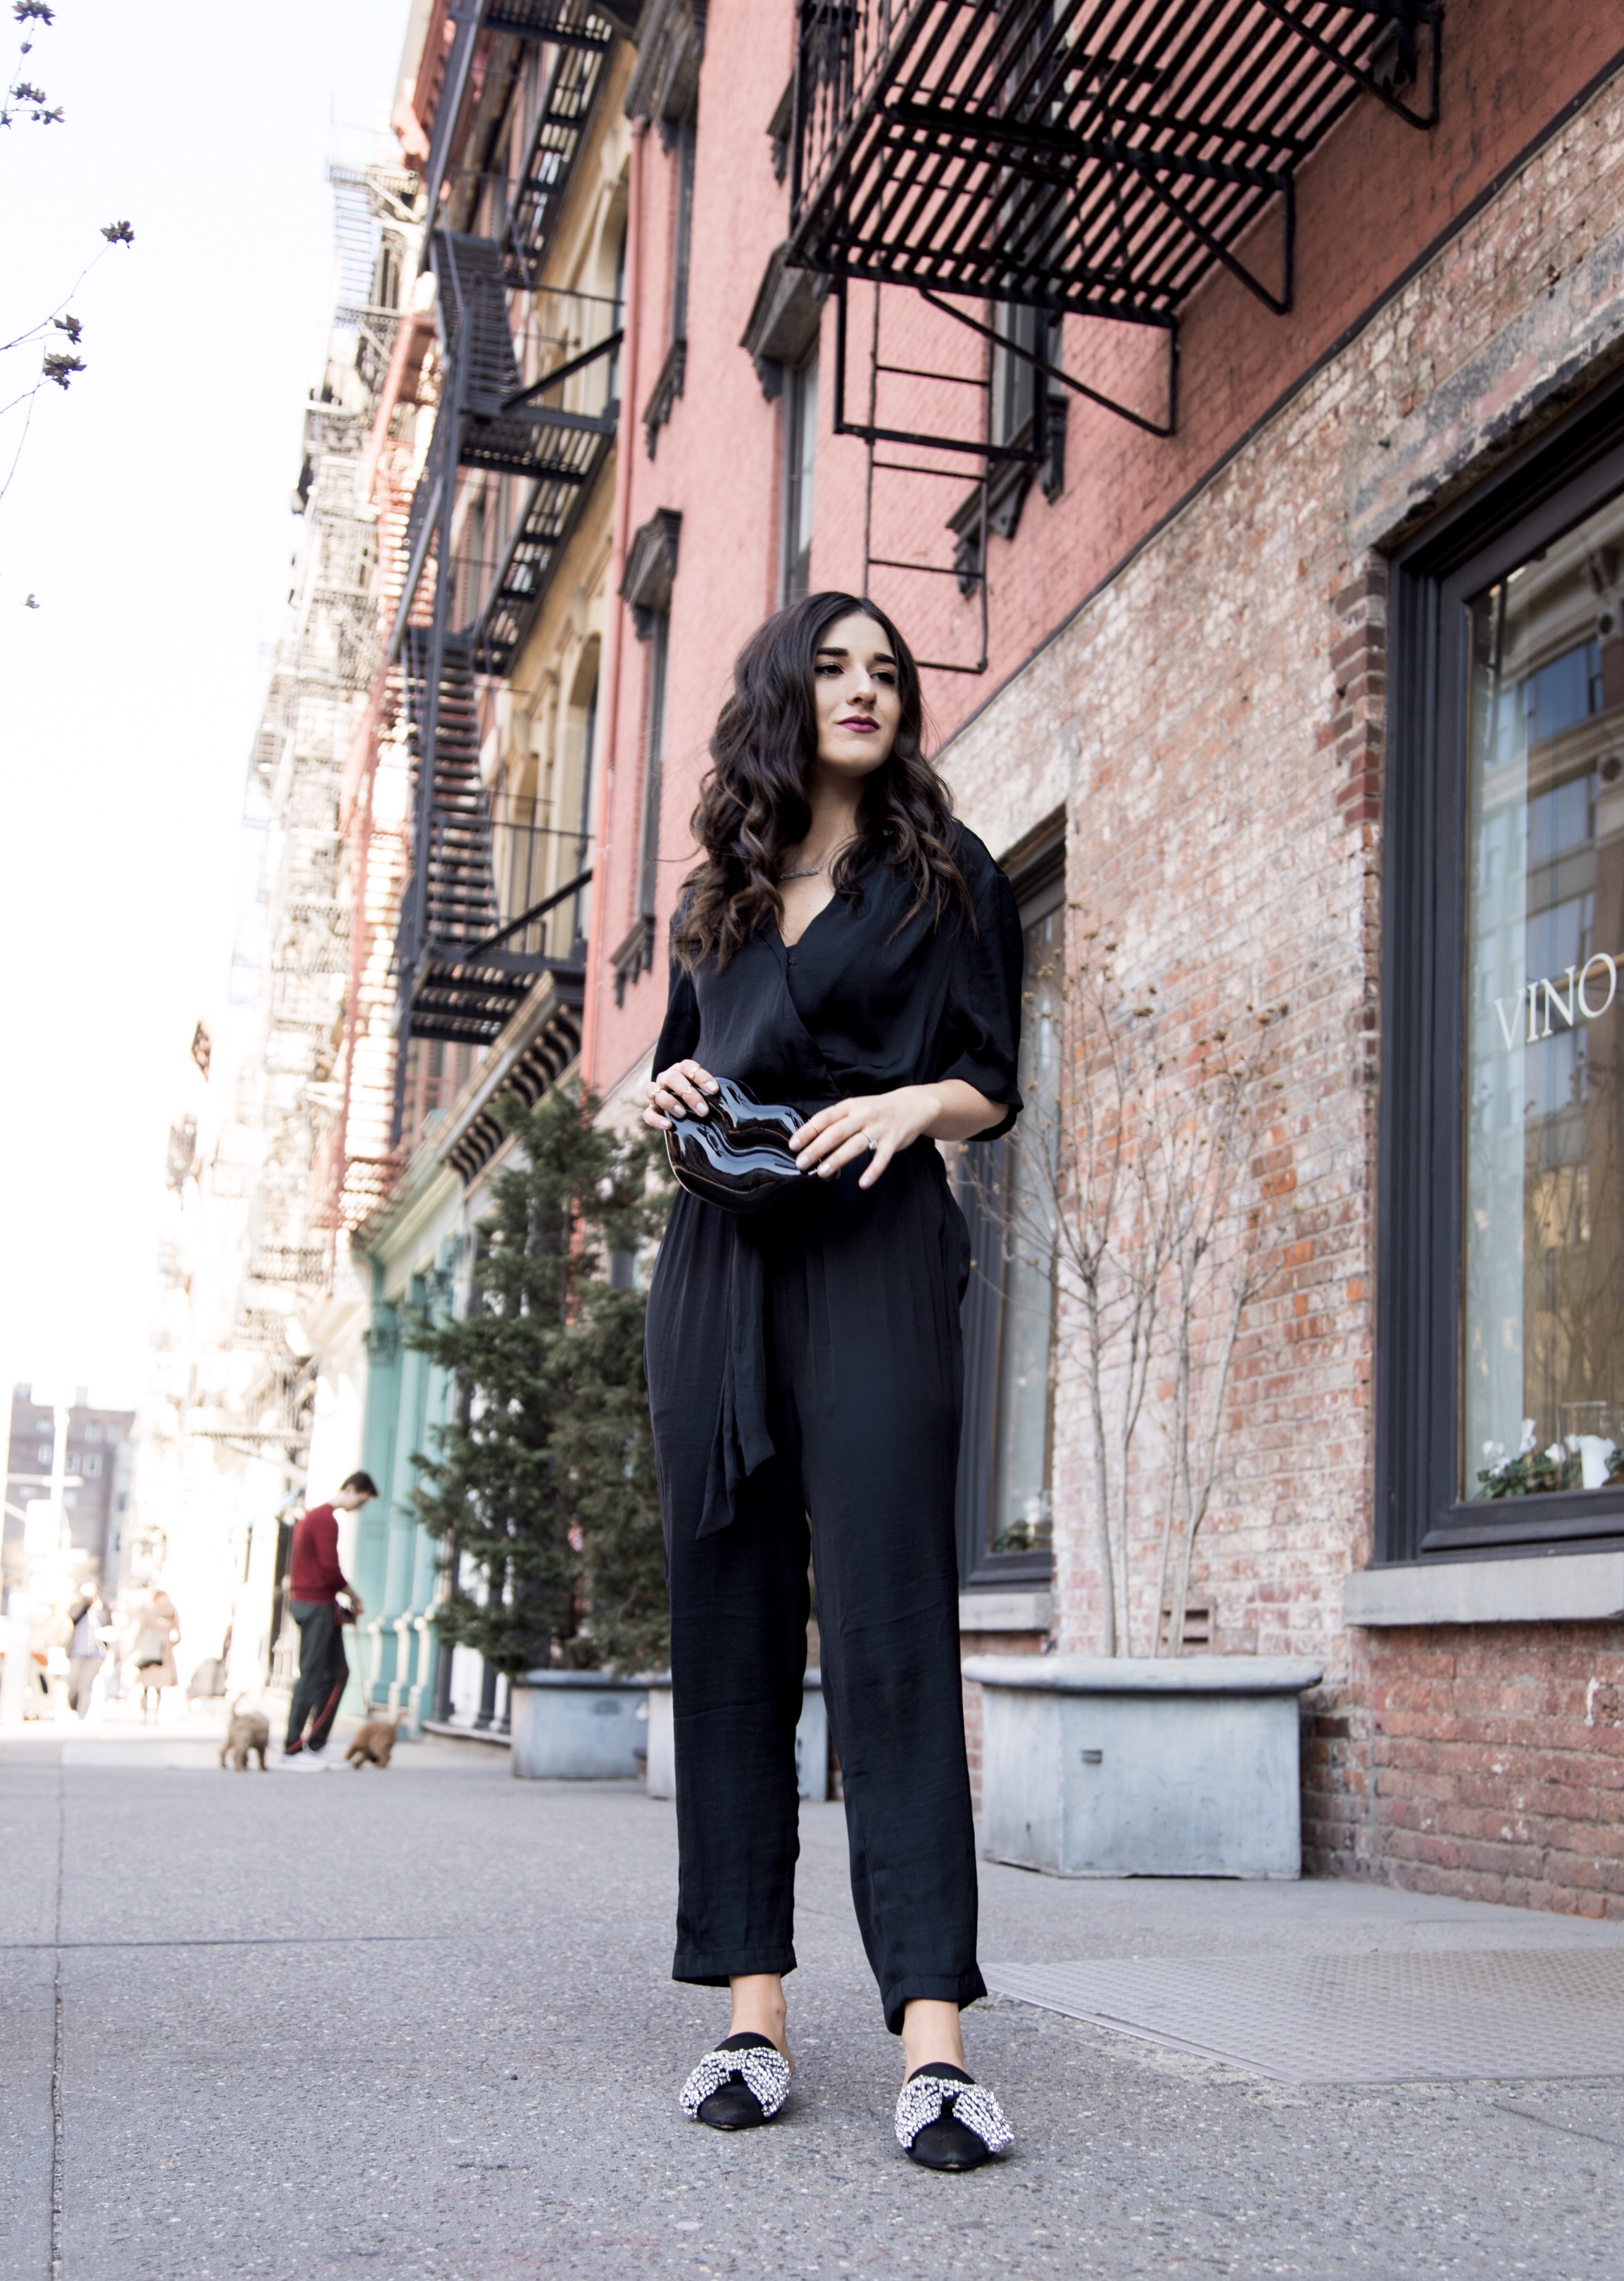 Where We're Going For Our Honeymoon Black Silk Jumpsuit Bow Mules Esther Santer Fashion Blog NYC Street Style Blogger Outfit OOTD Trendy Urban Outfitters Betsey Johnson Soho Collab Jeweled  Shoes Earrings Braid Hairstyle Hoops Necklace Lips Clutch Bag.jpg